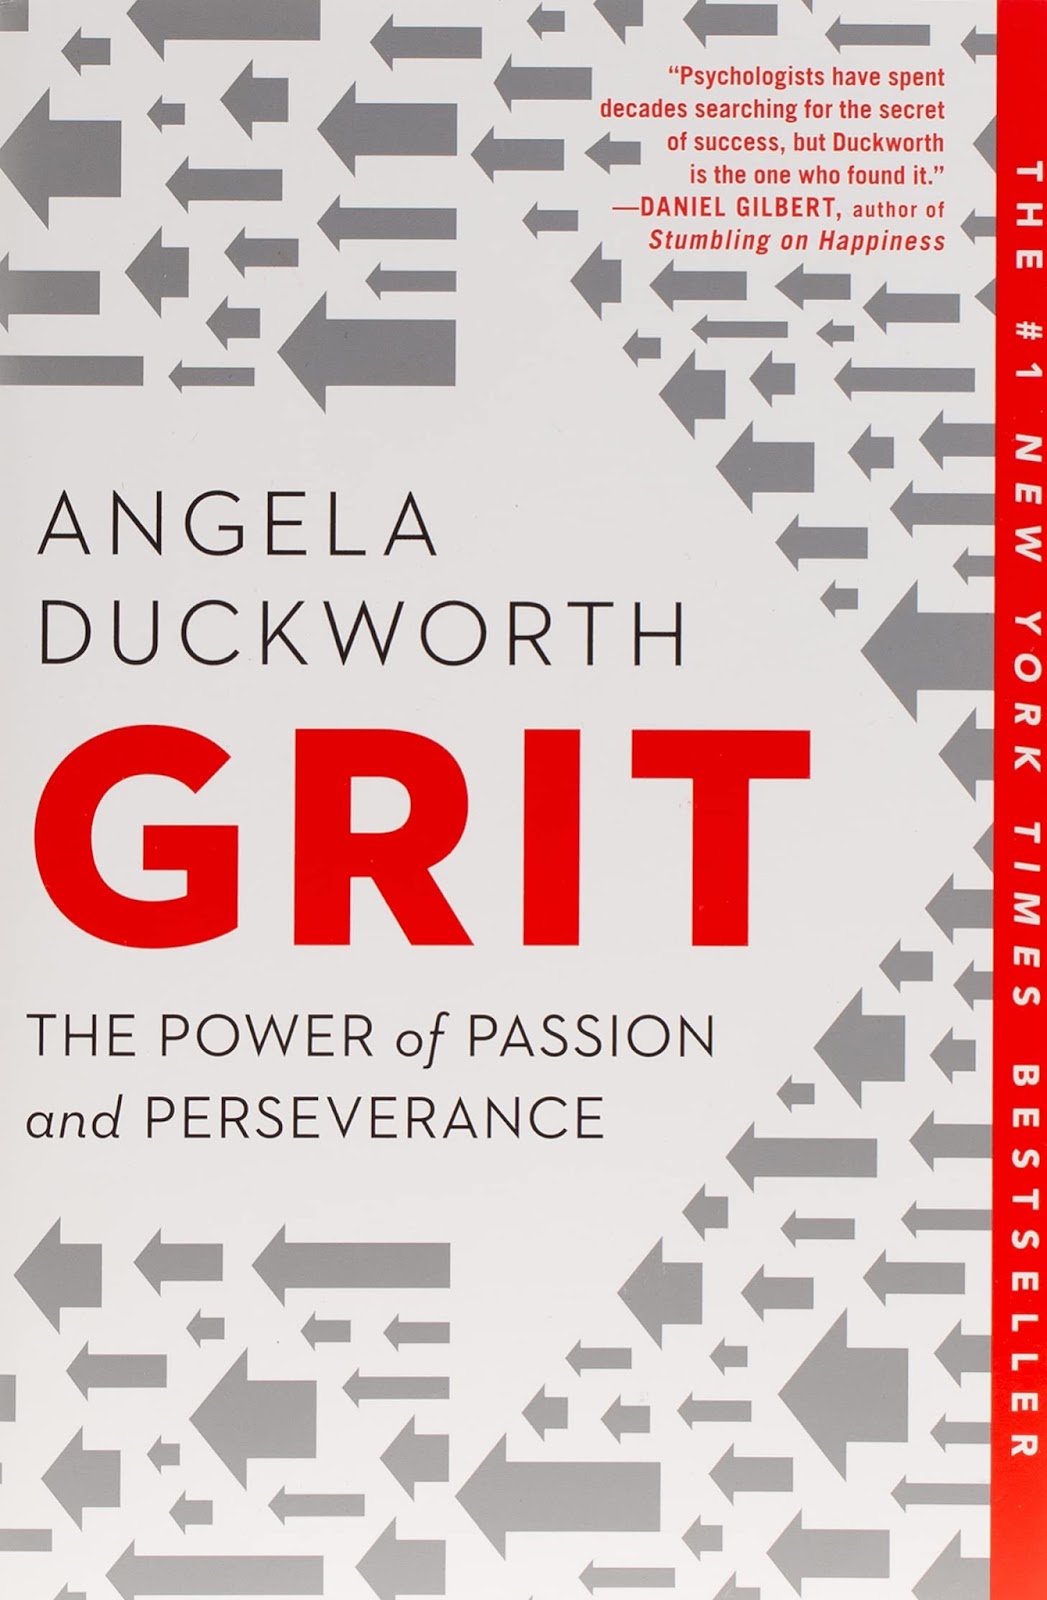 books for entrepreneurs Grit: The Power of Passion and Perseverance by Angela Duckworth